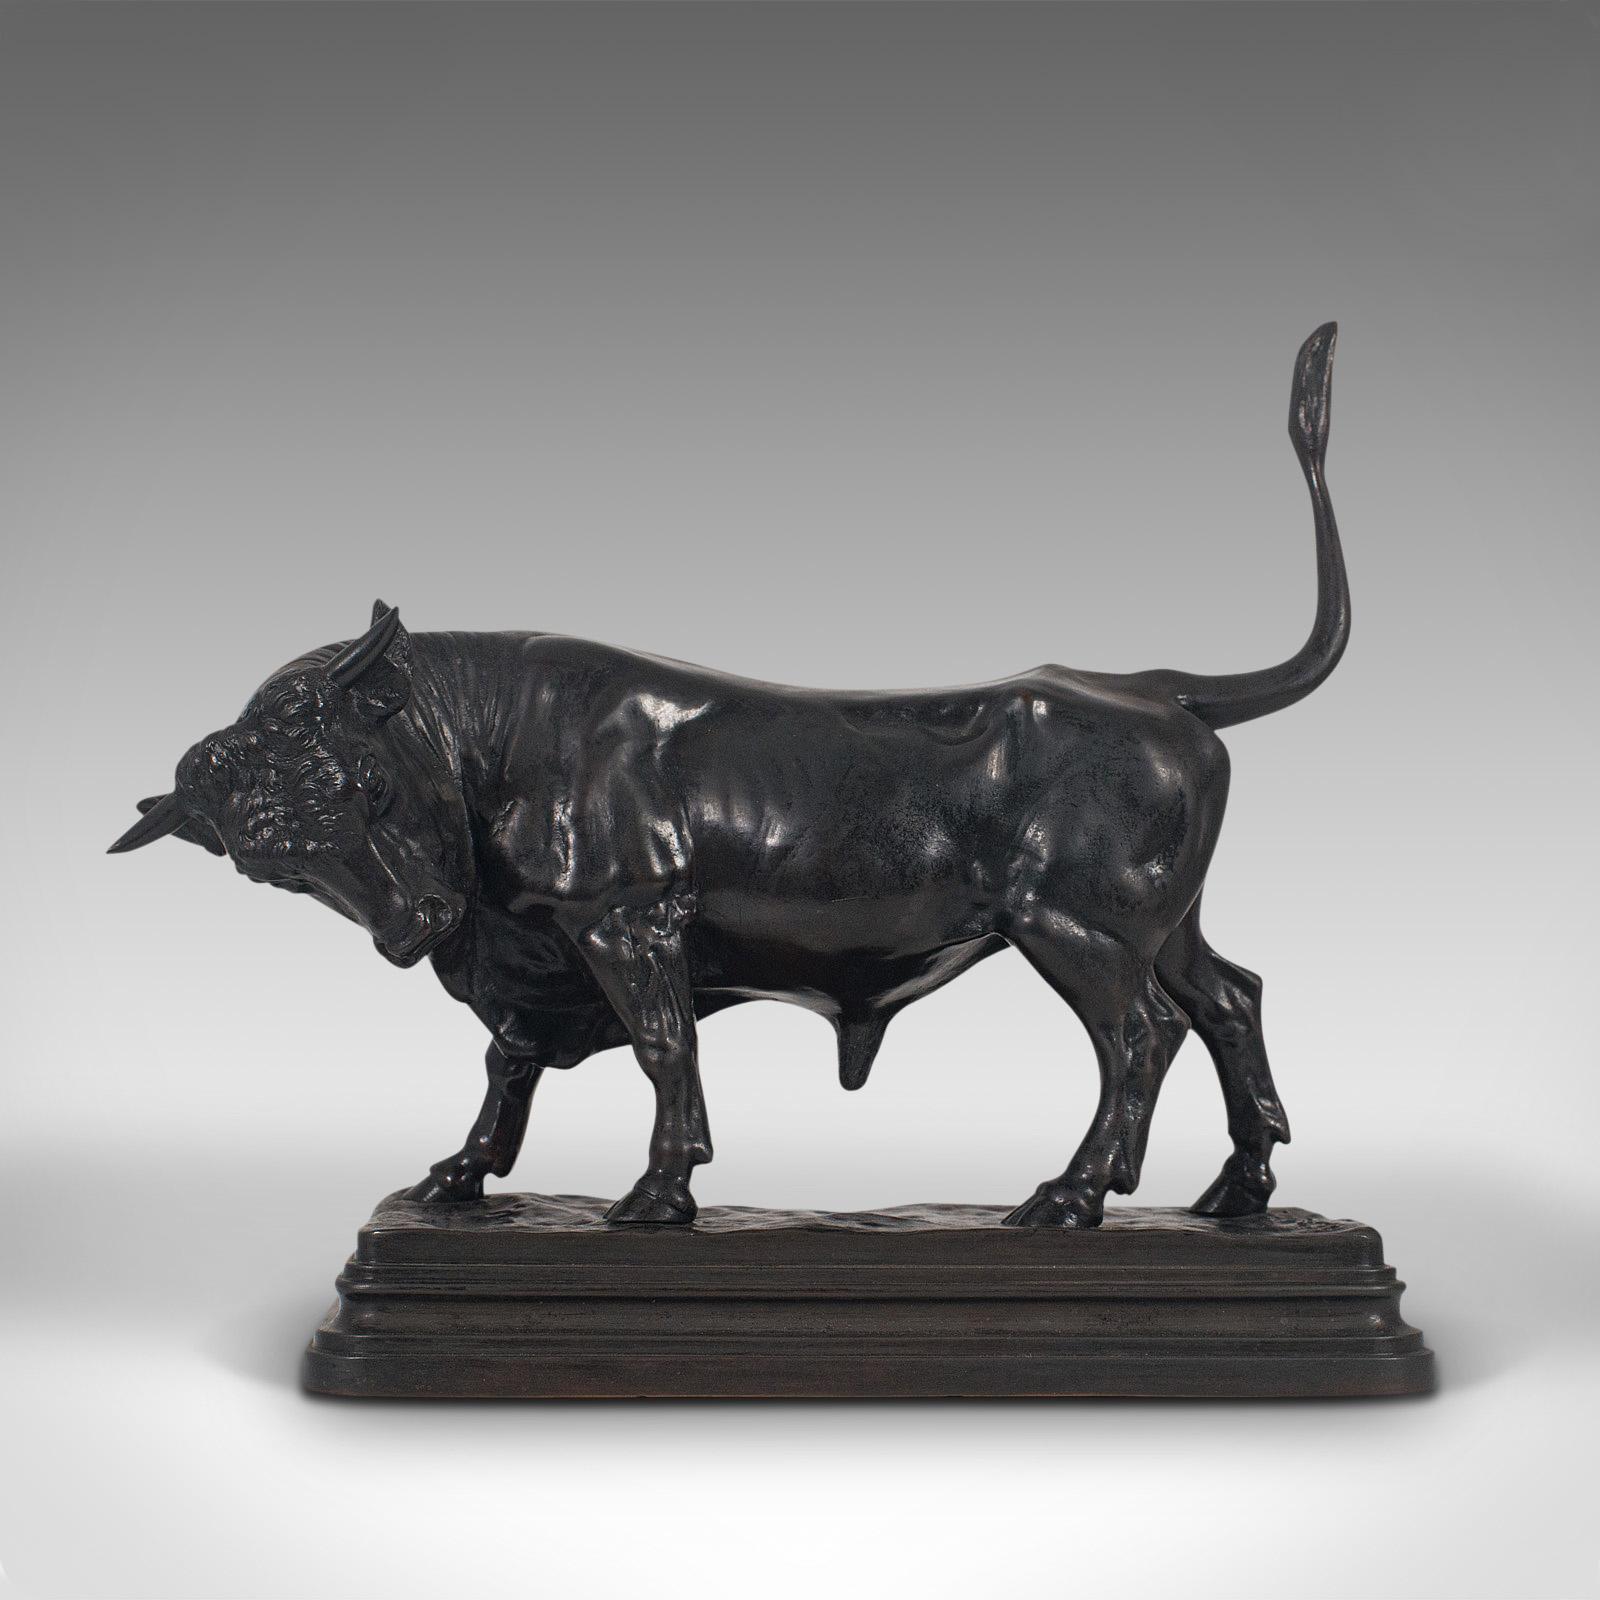 This is an antique bull figure. An Austrian, bronze study or statue, dating to the late 19th century, circa 1900.

Striking anatomical study of a powerful animal
Displaying a desirable aged patina - in very good order
Cold-painted bronze offers